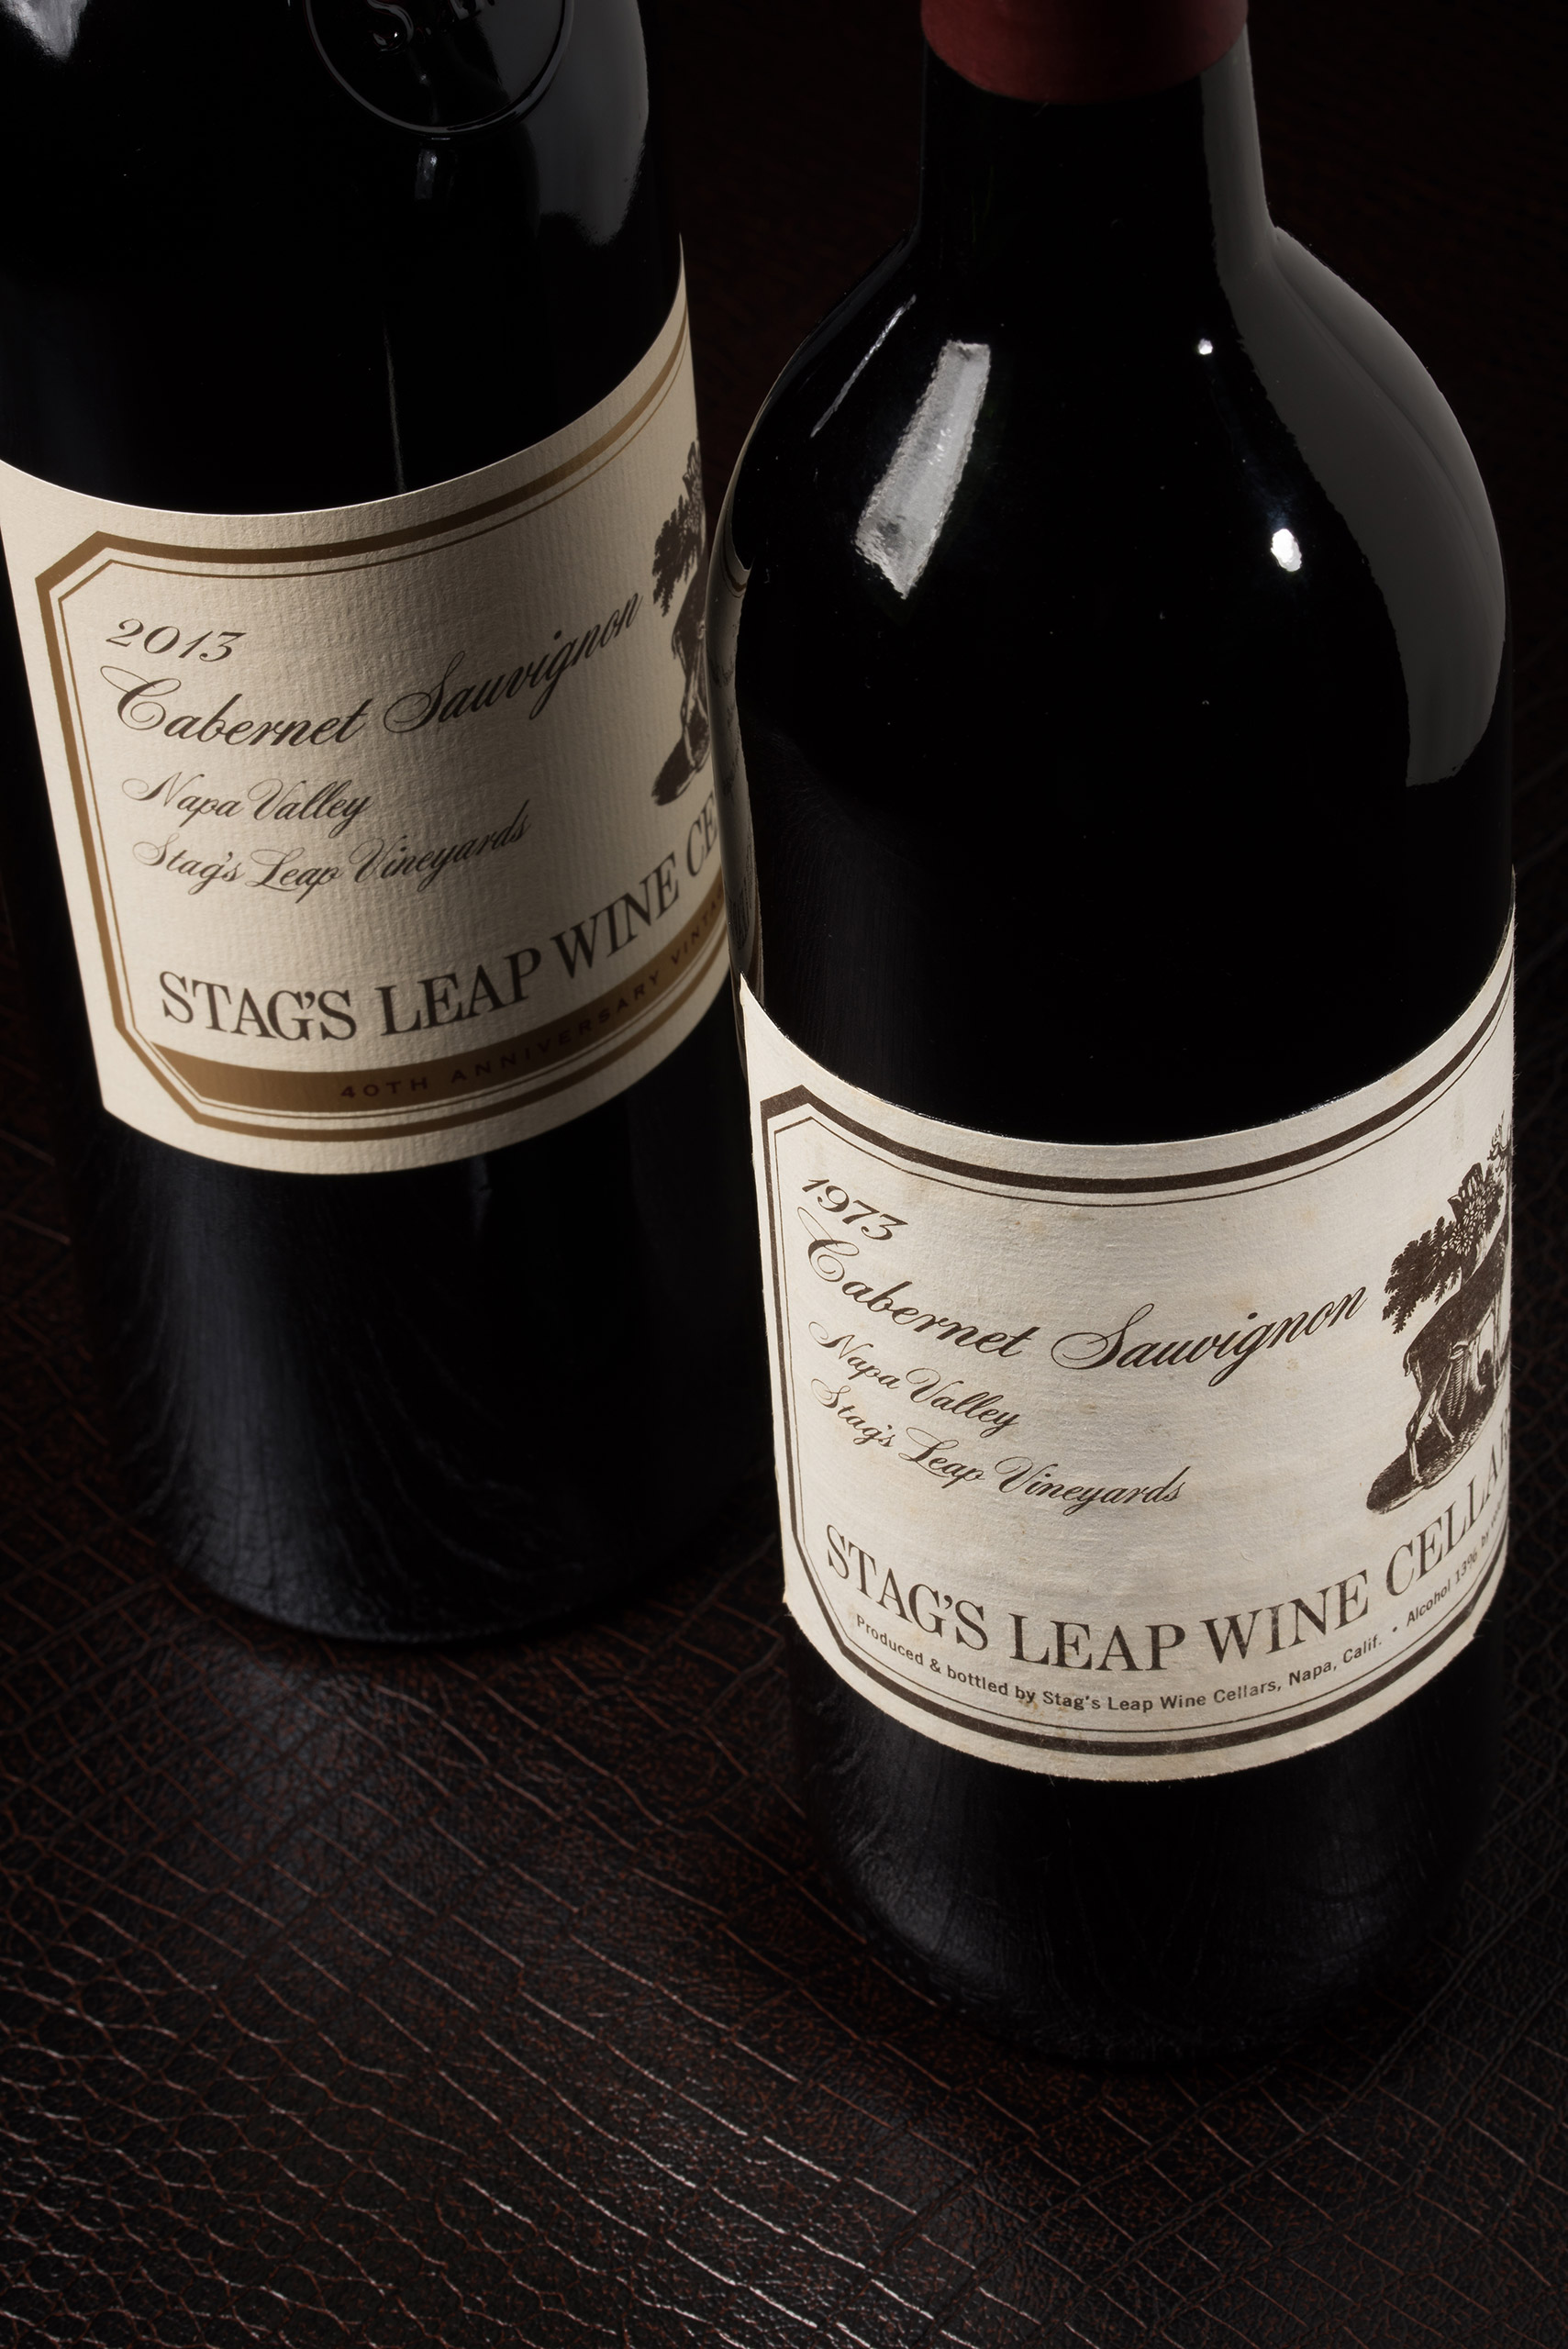 2013 S.L.V. Cabernet Sauvignon in the 40th Anniversary commemorative bottling – next to the 1973 S.L.V. that won the Paris Tasting. (Stag's Leap Wine Cellars)